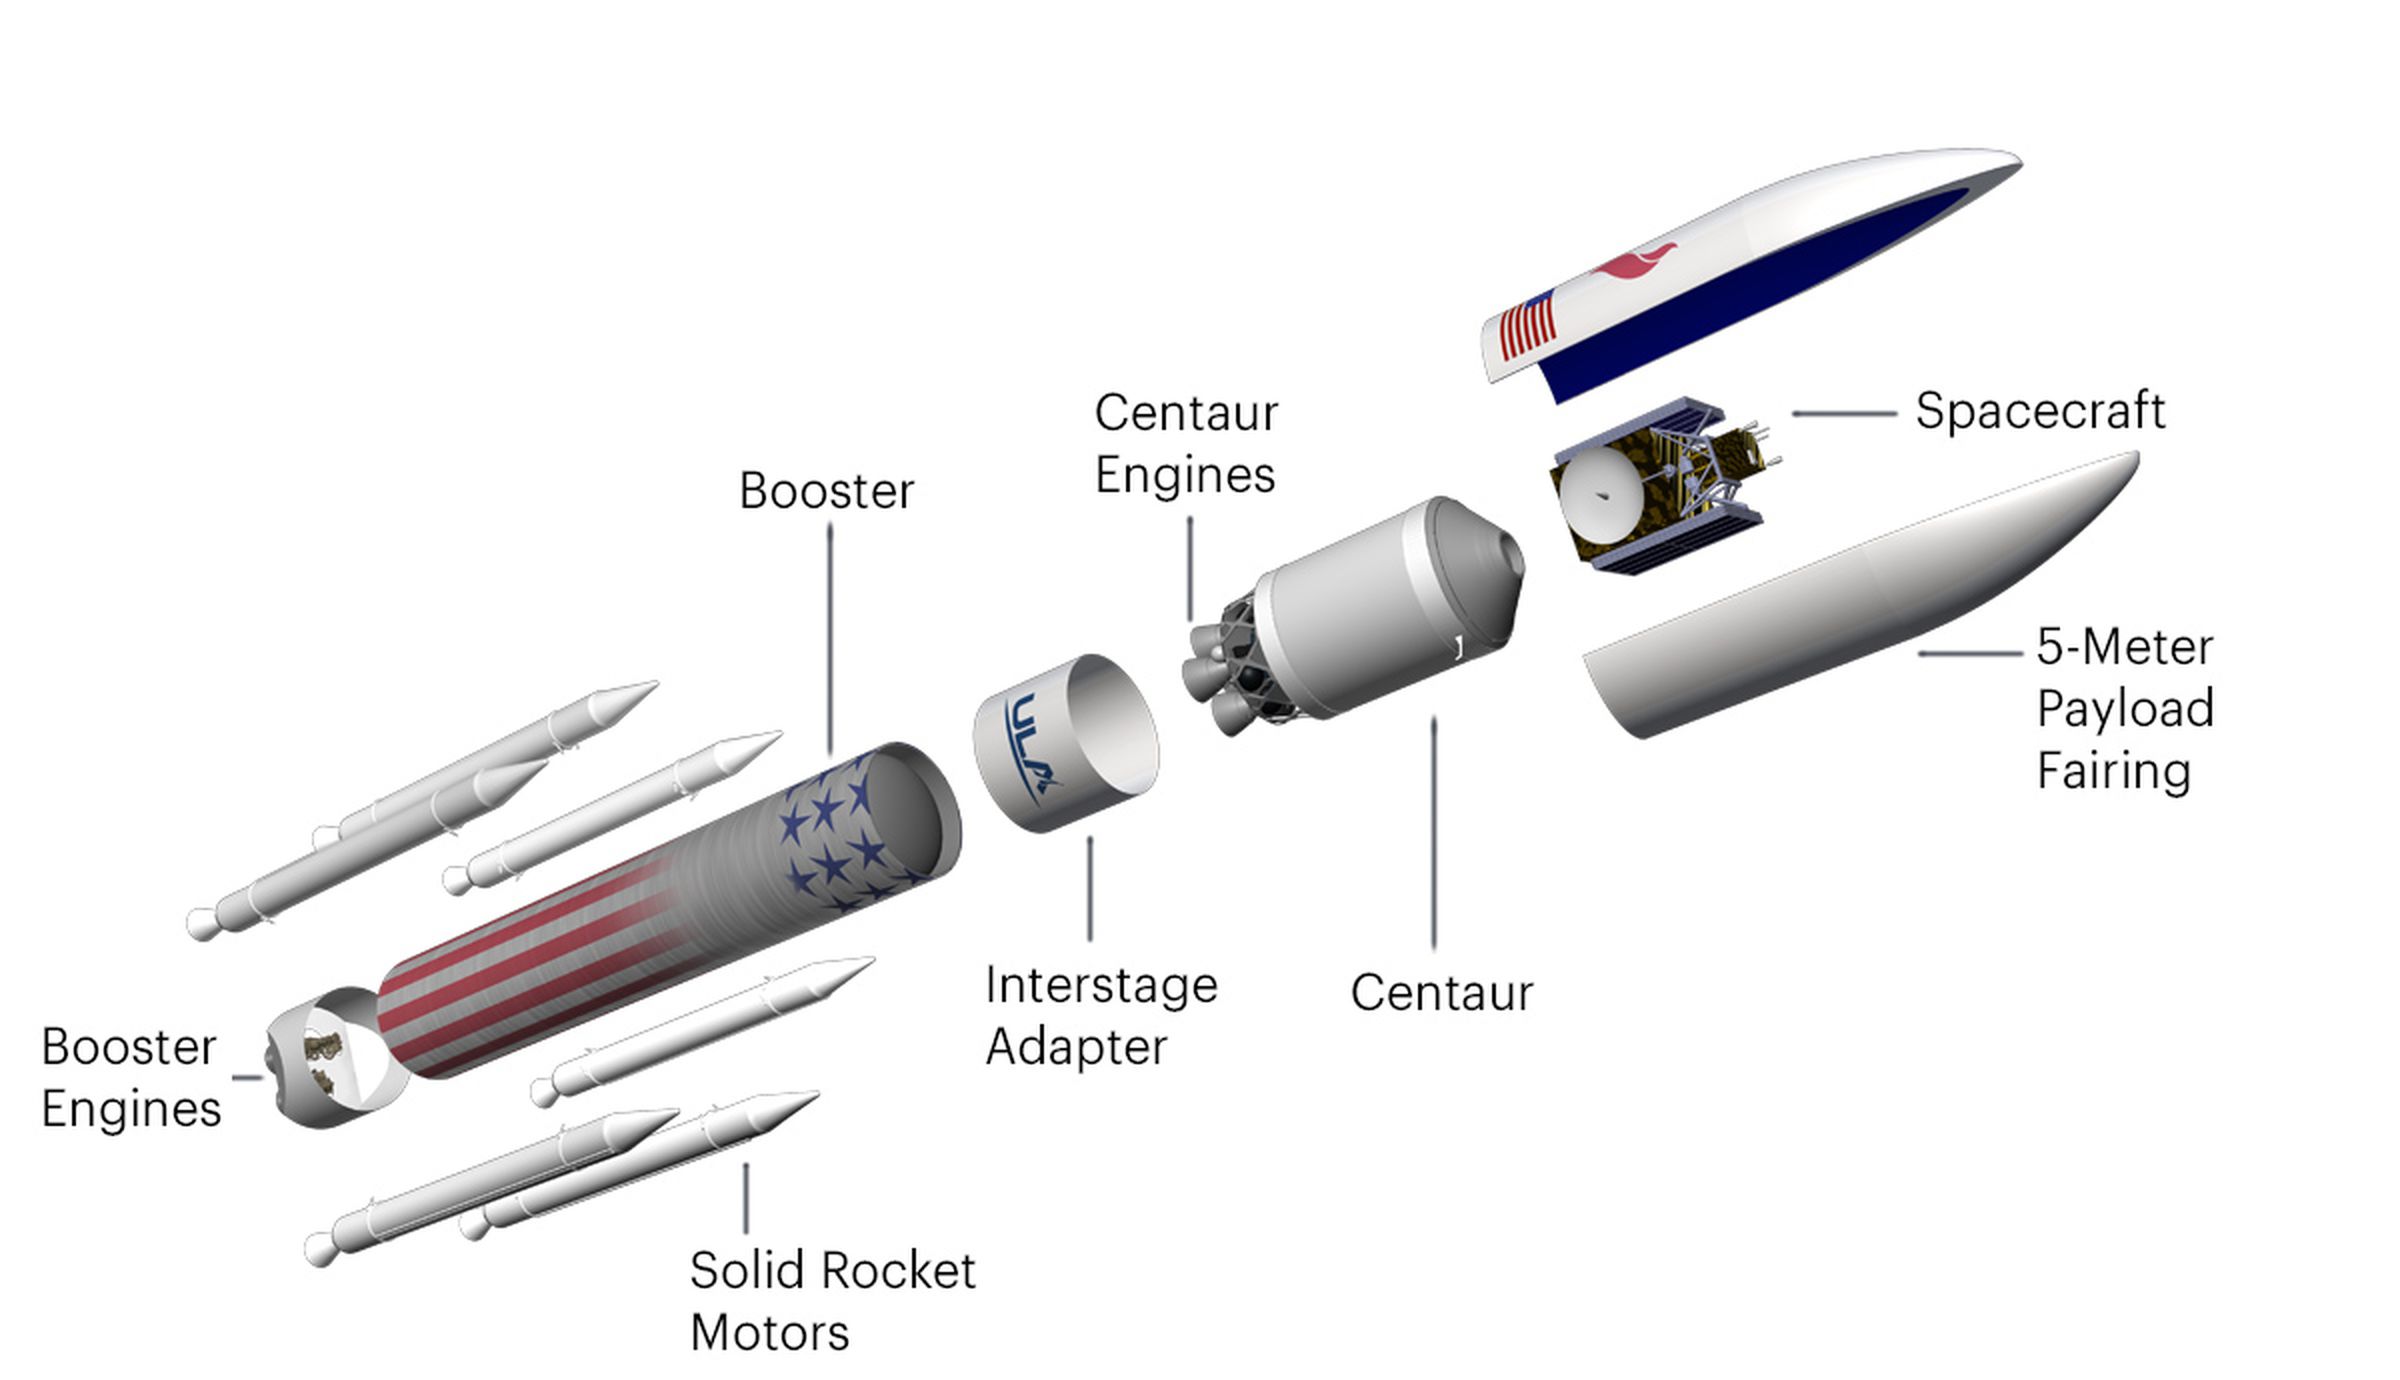 A rendering of the different parts of the Vulcan rocket